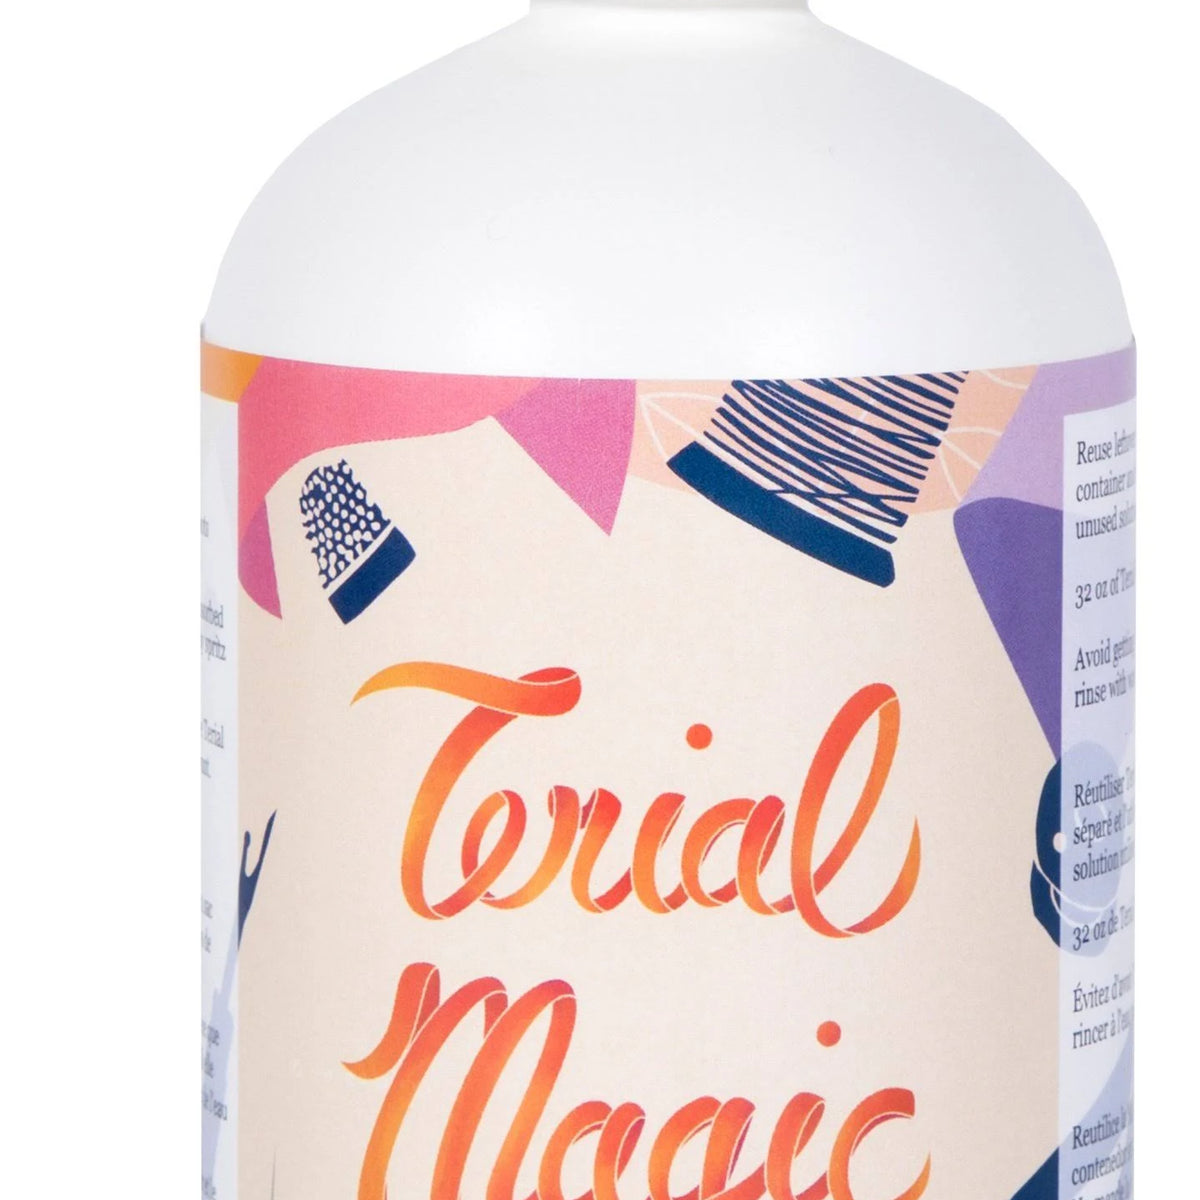 Terial Magic: Your New Favorite Fabric Stabilizer - Suzy Quilts